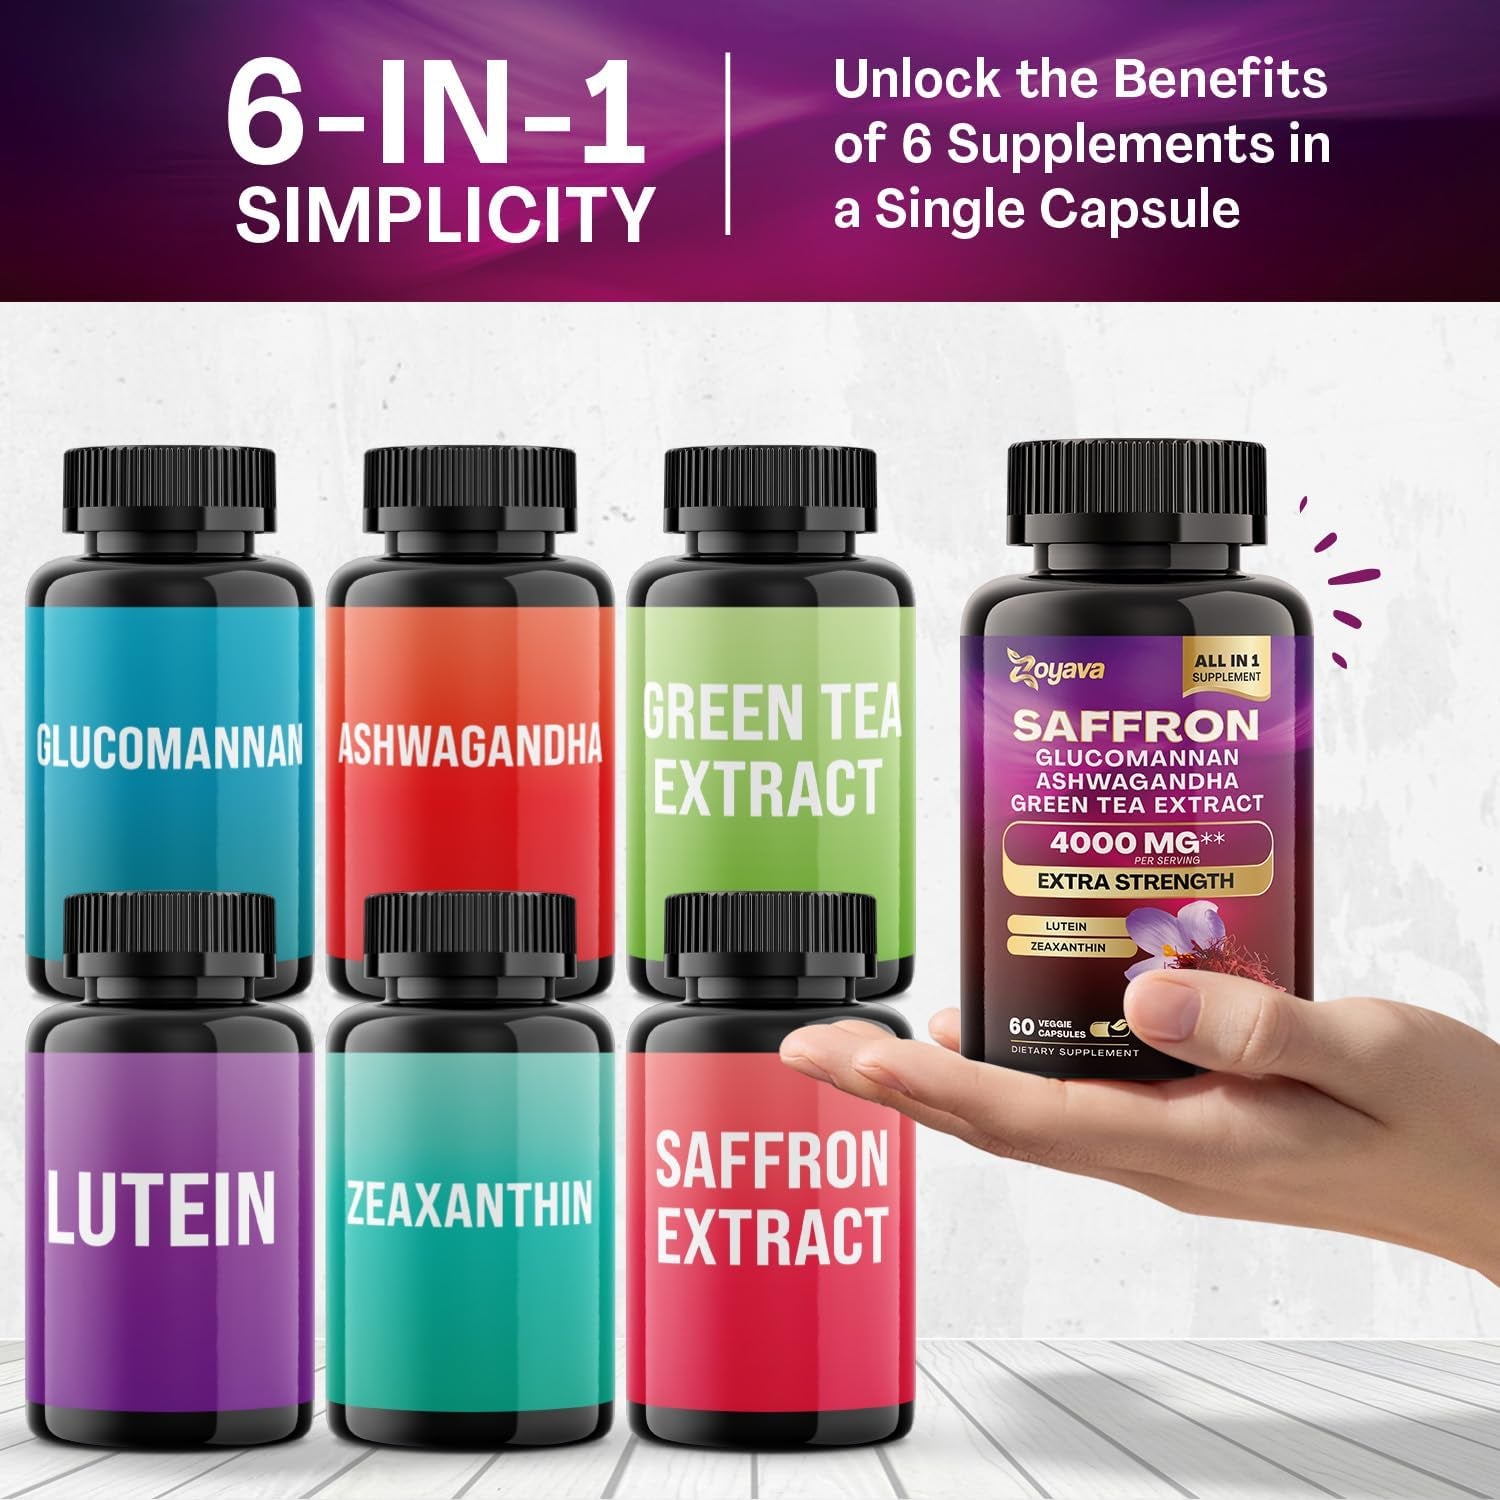 Sea Moss 16-In-1 (180 Caps) and Saffron 6-In-1 (60 Caps) - Wellness Synergy Bundle